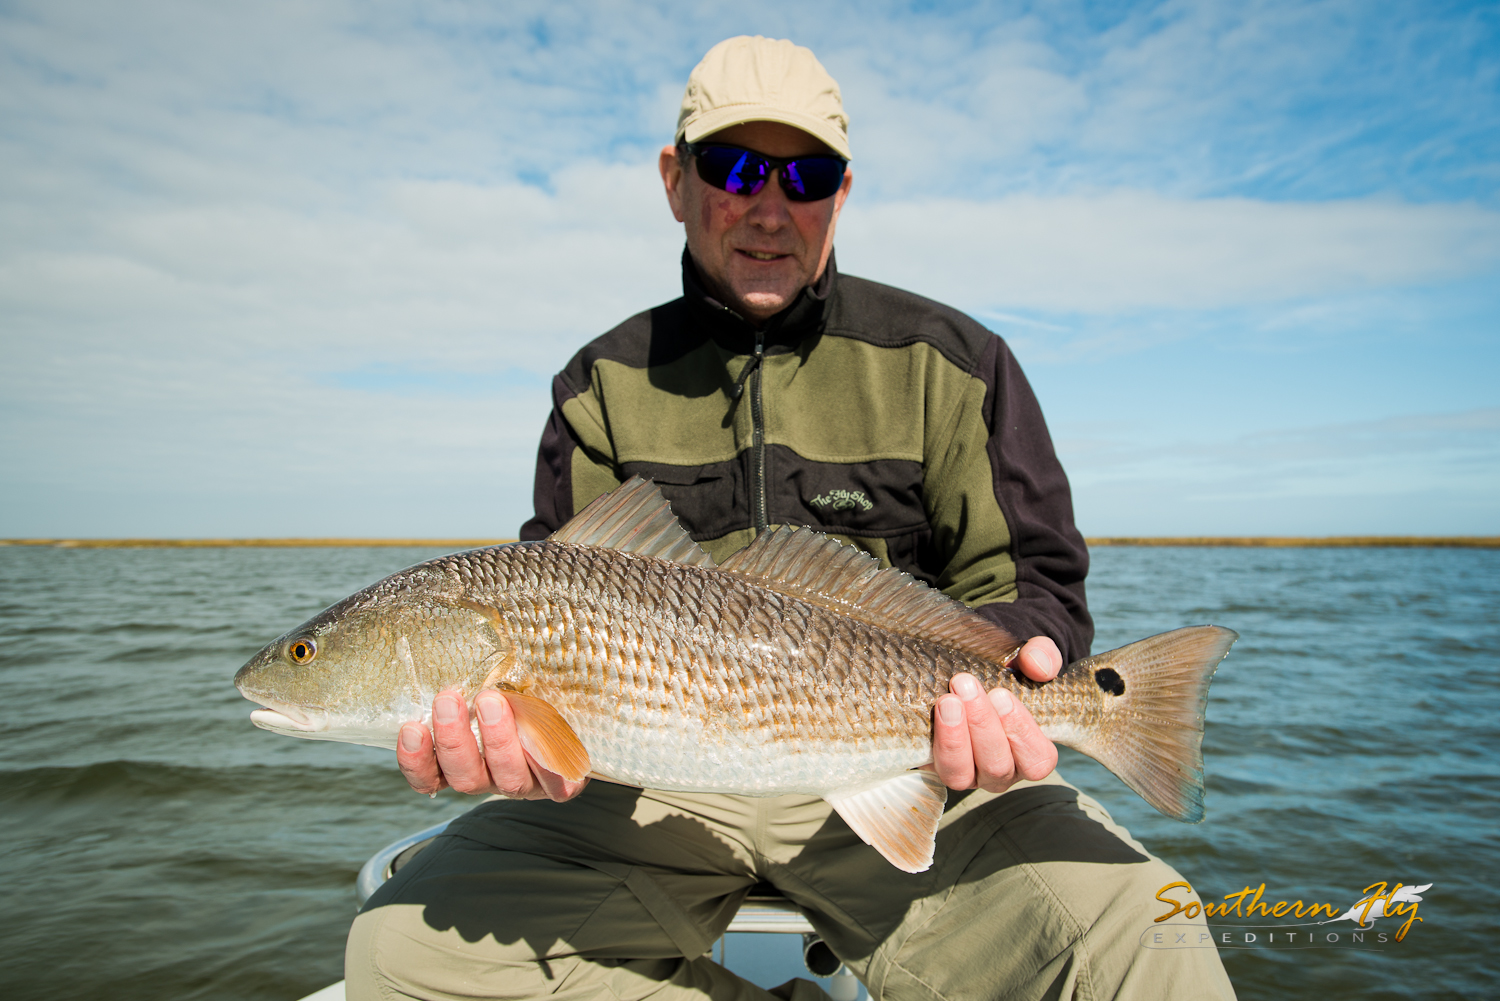 best fishing guides in new orleans louisiana - southern fly expeditions and captain brandon keck 